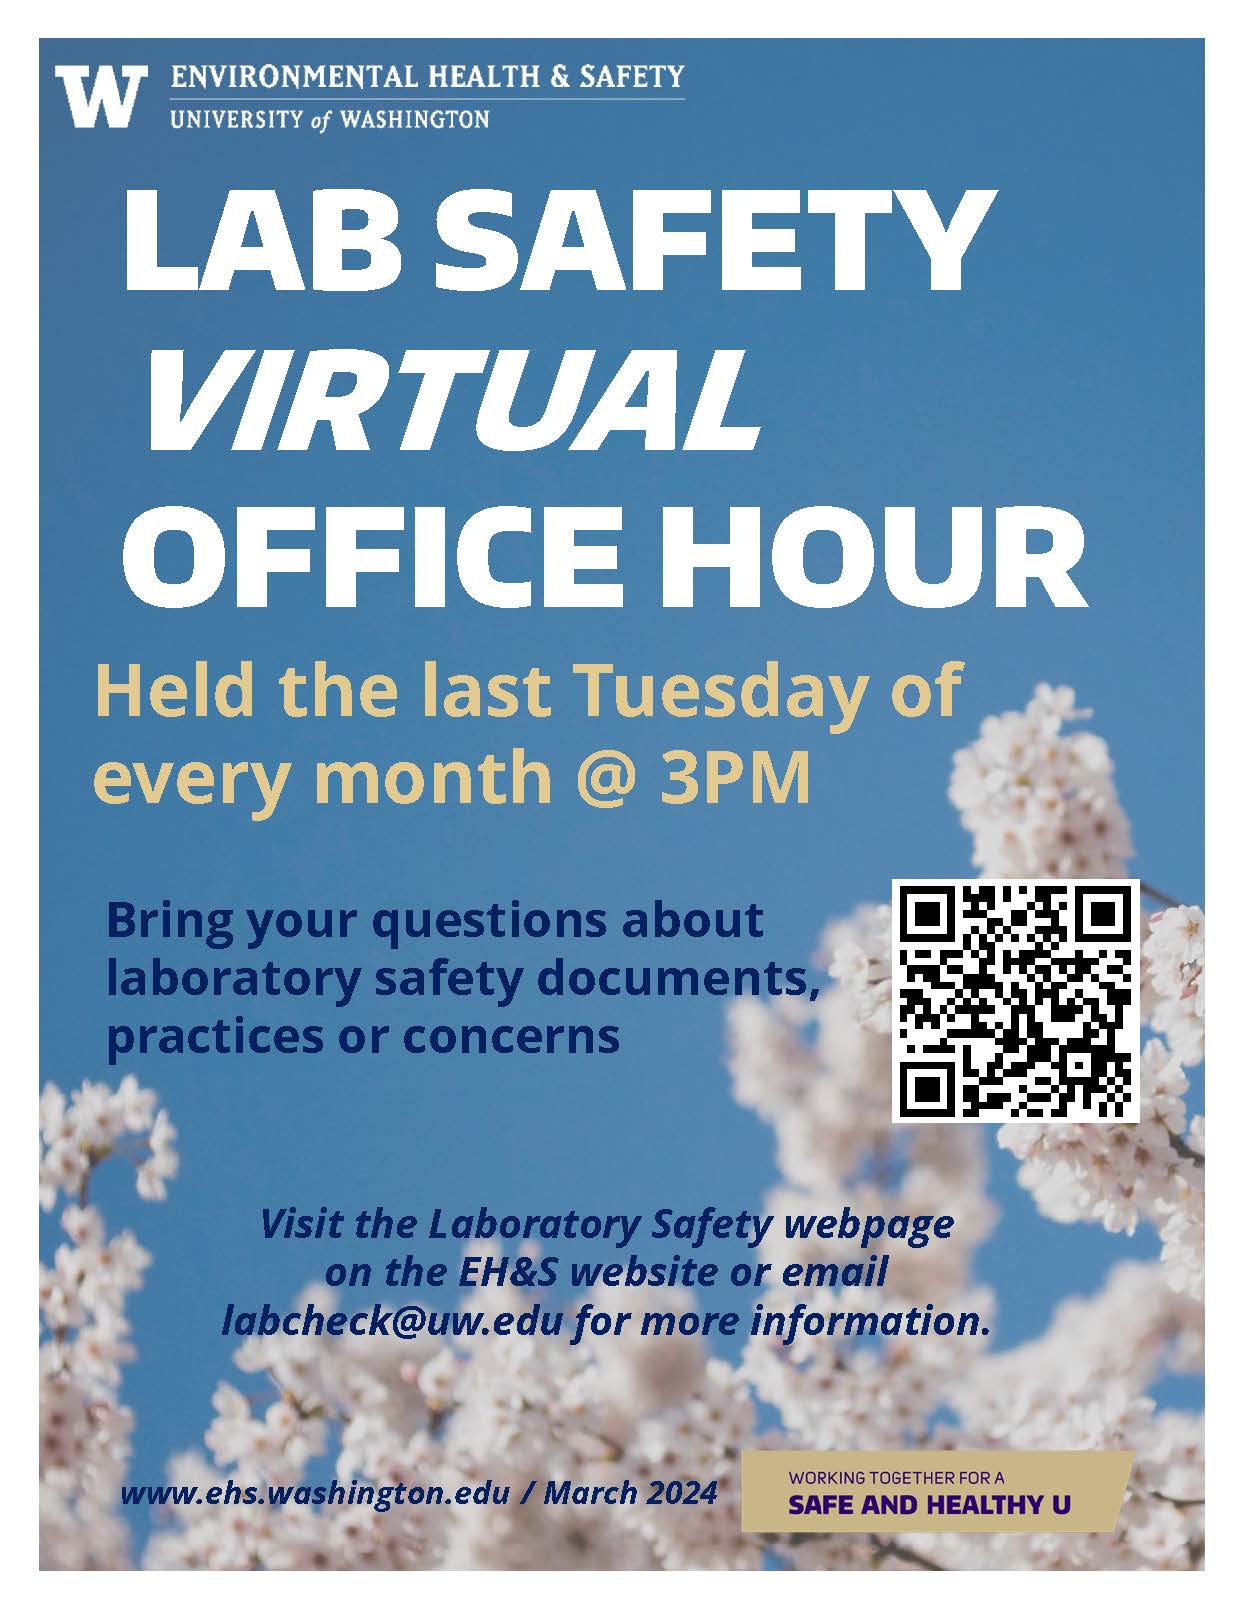 Poster announcing Lab Safety Office Hours